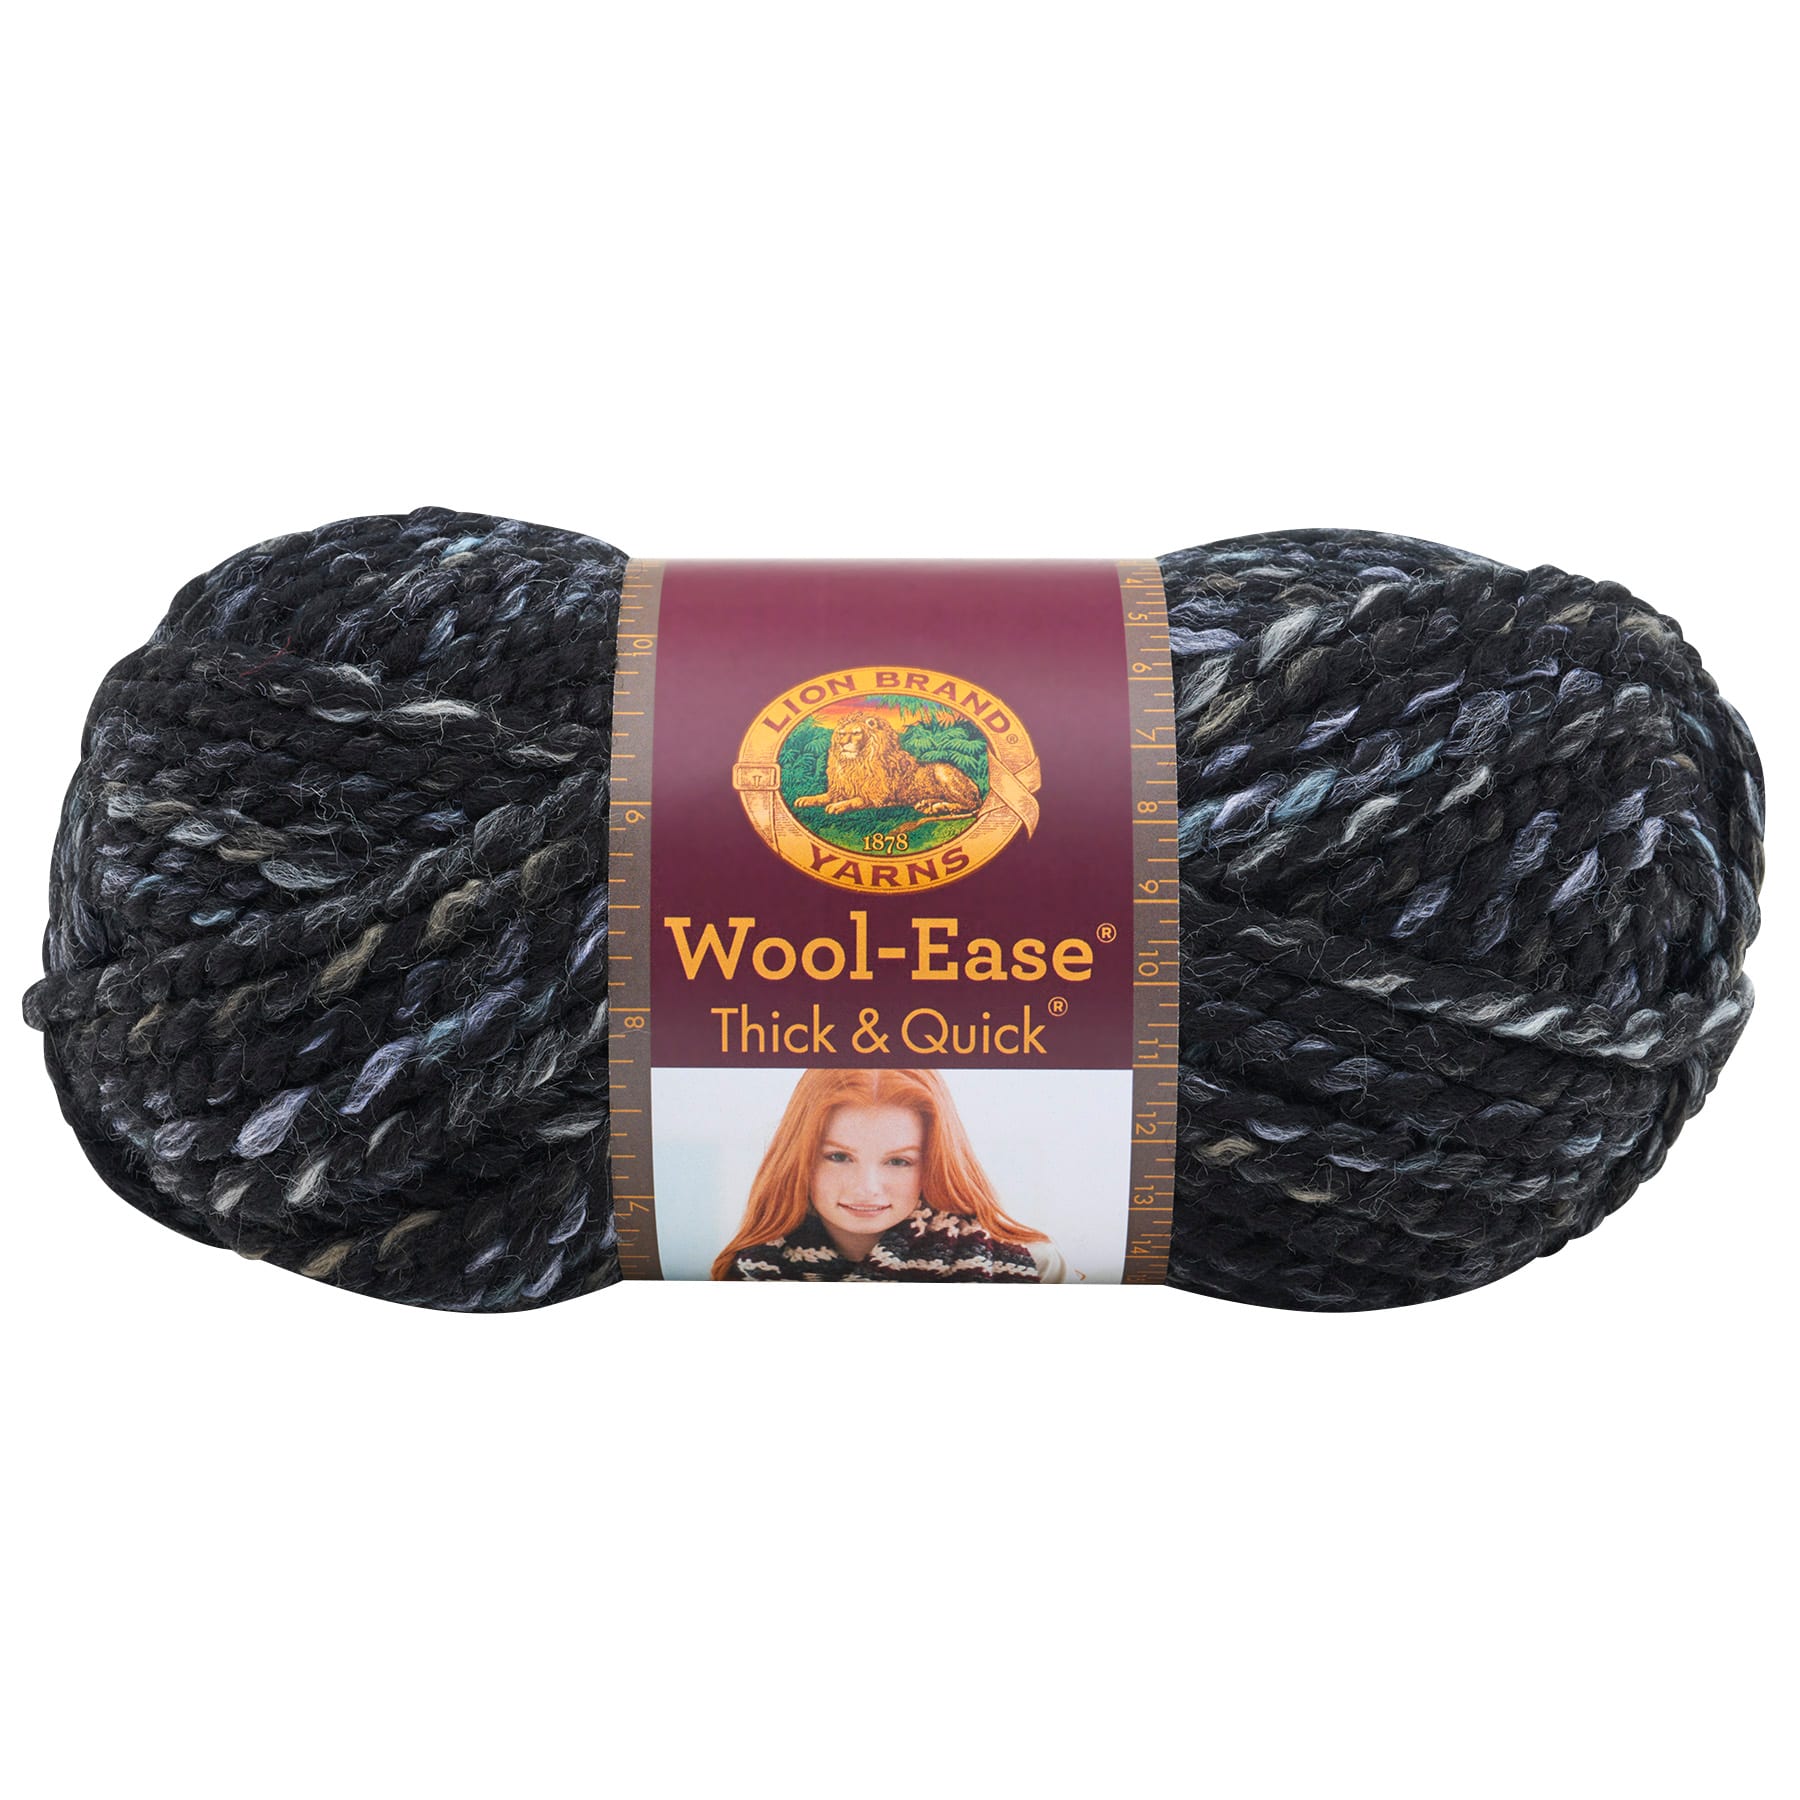 lion brand wool ease thick and quick yarn, lot of 3. Seaglass